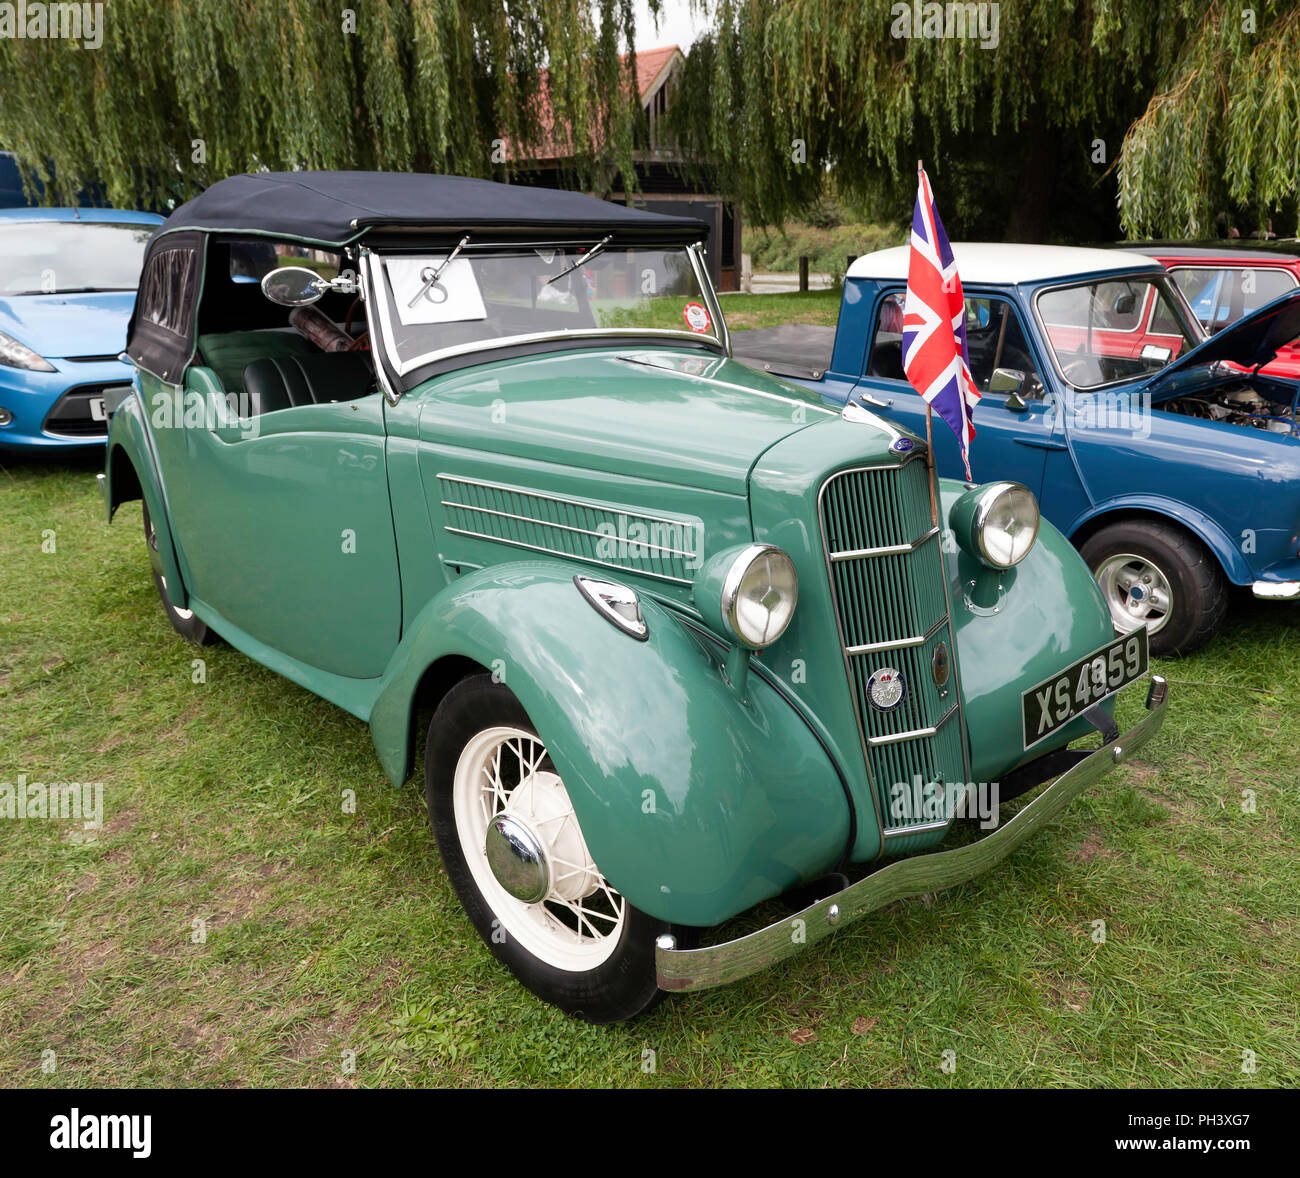 A rare,1937 Ford CX four-seat tourer on display at the Quay, during the 2018 Sandwich Festival Stock Photo